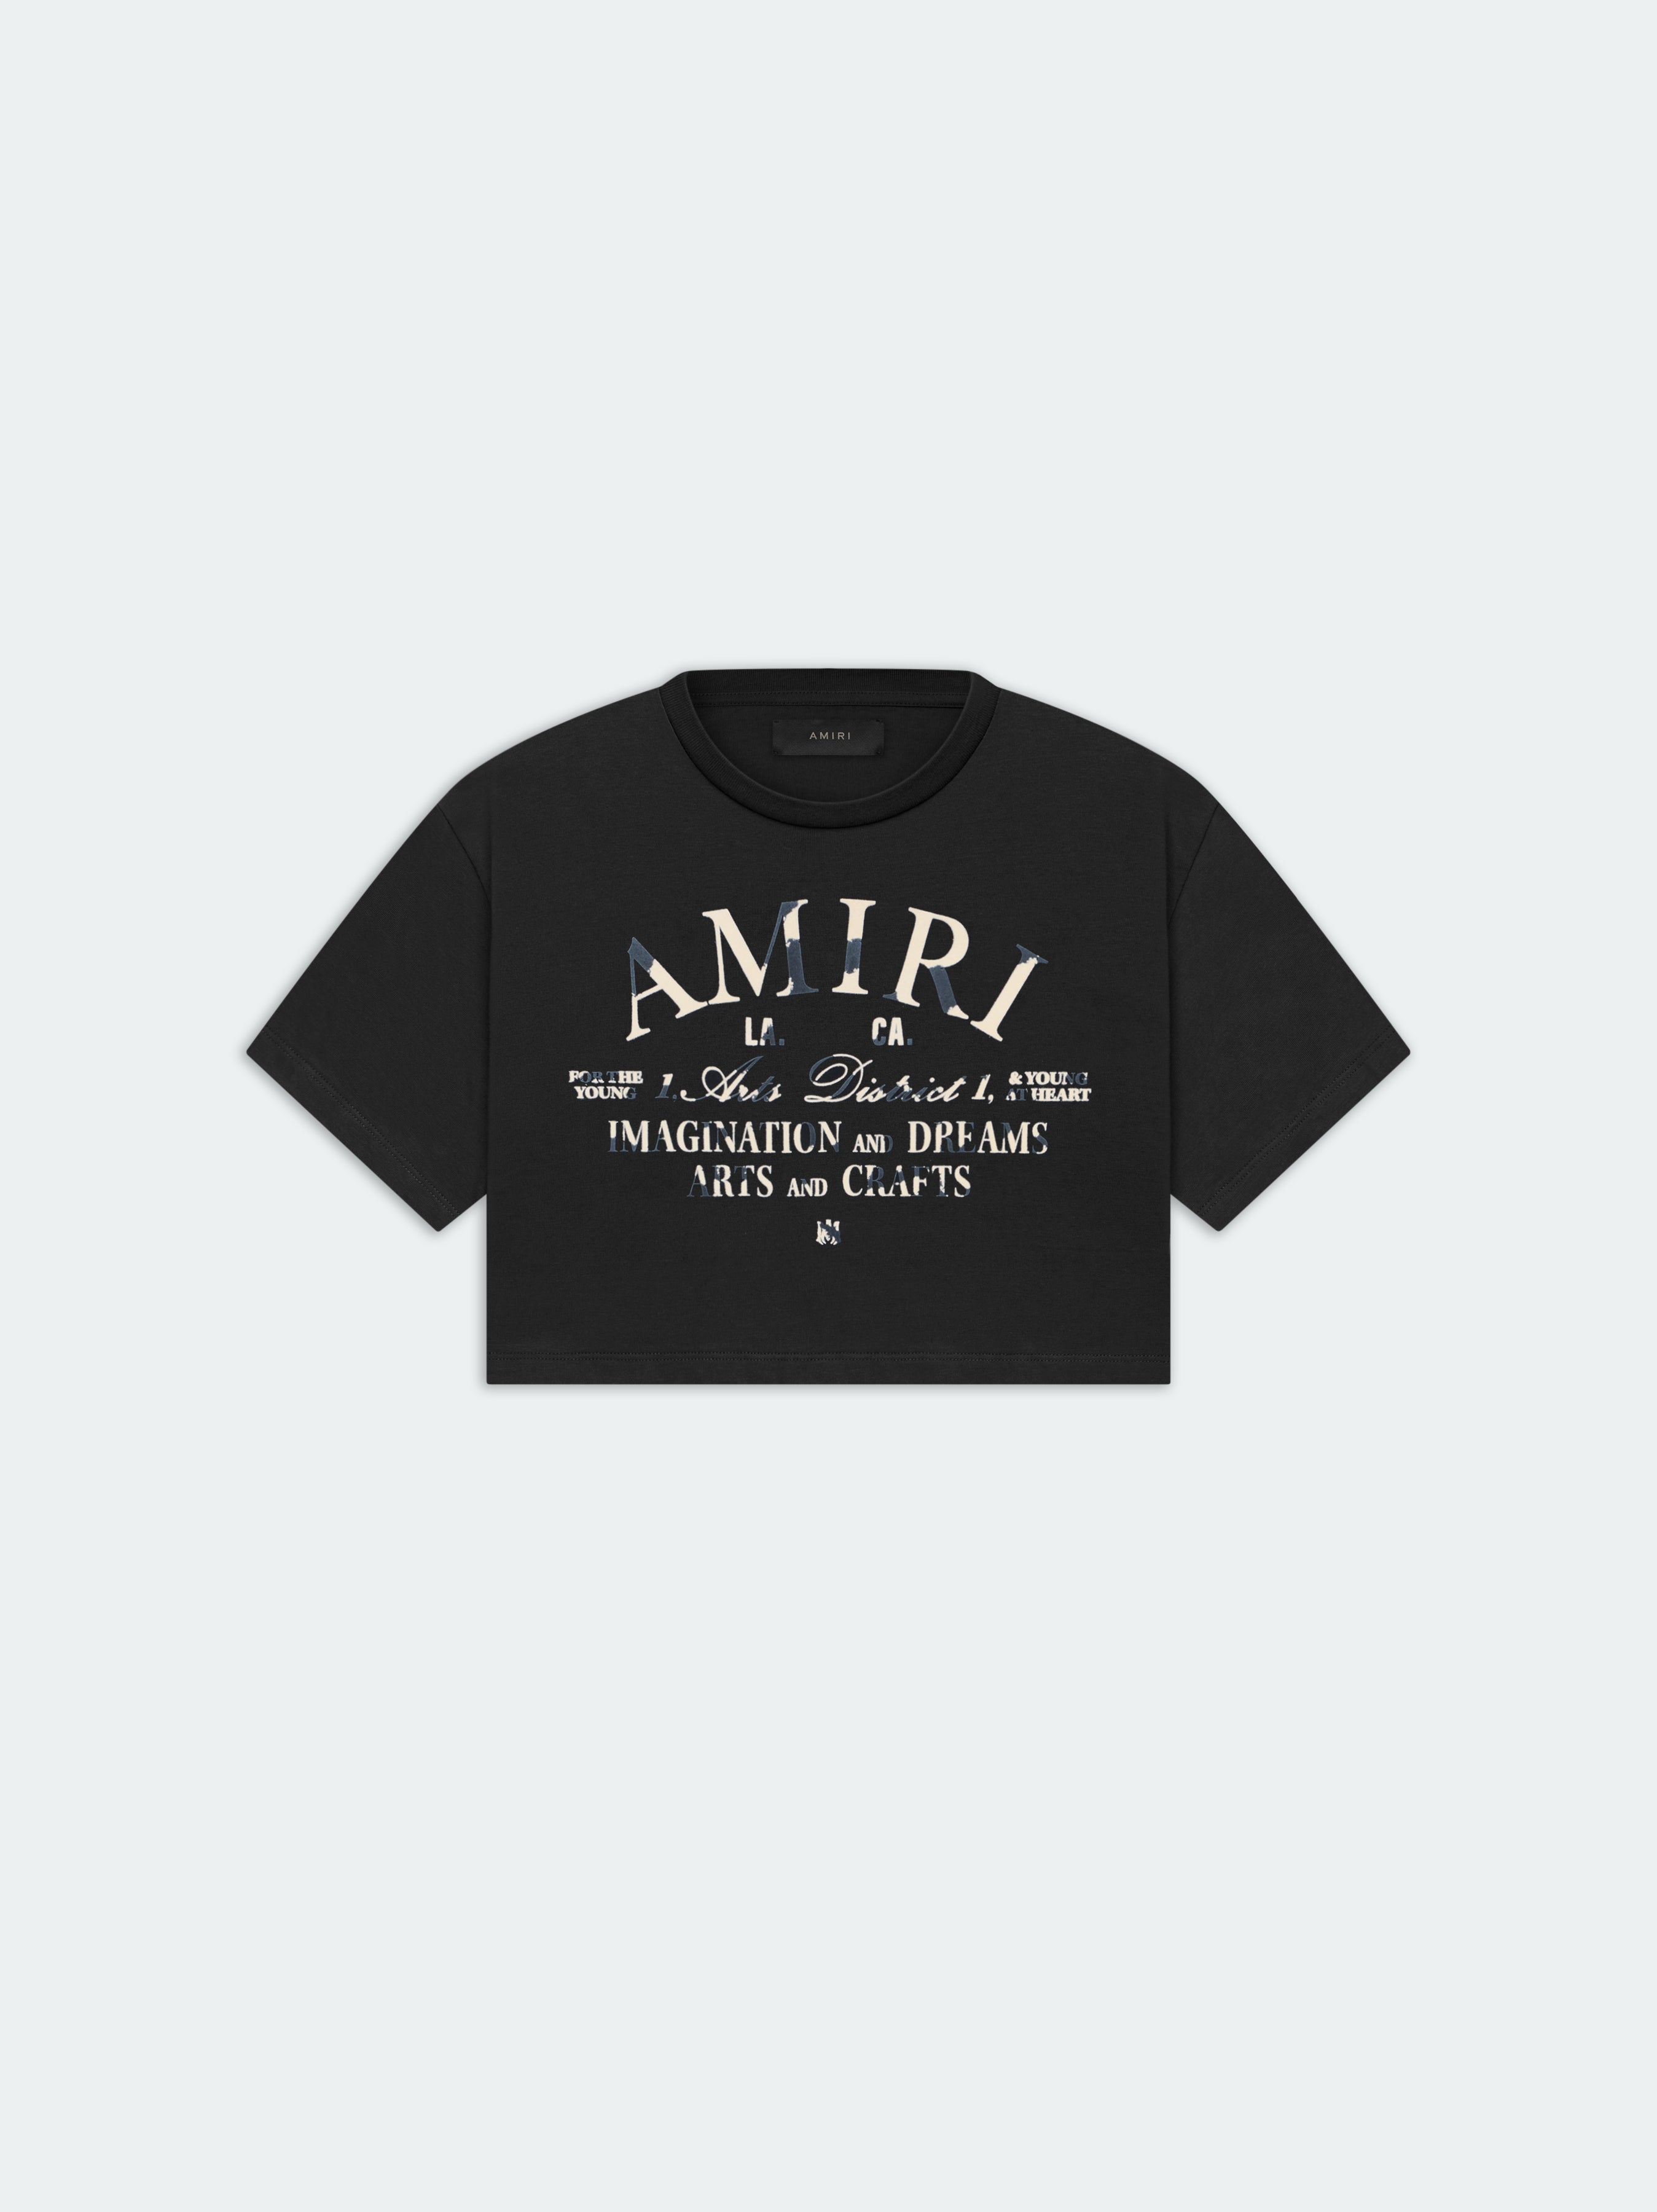 Product WOMEN - DISTRESSED ARTS DISTRICT TEE - Black featured image